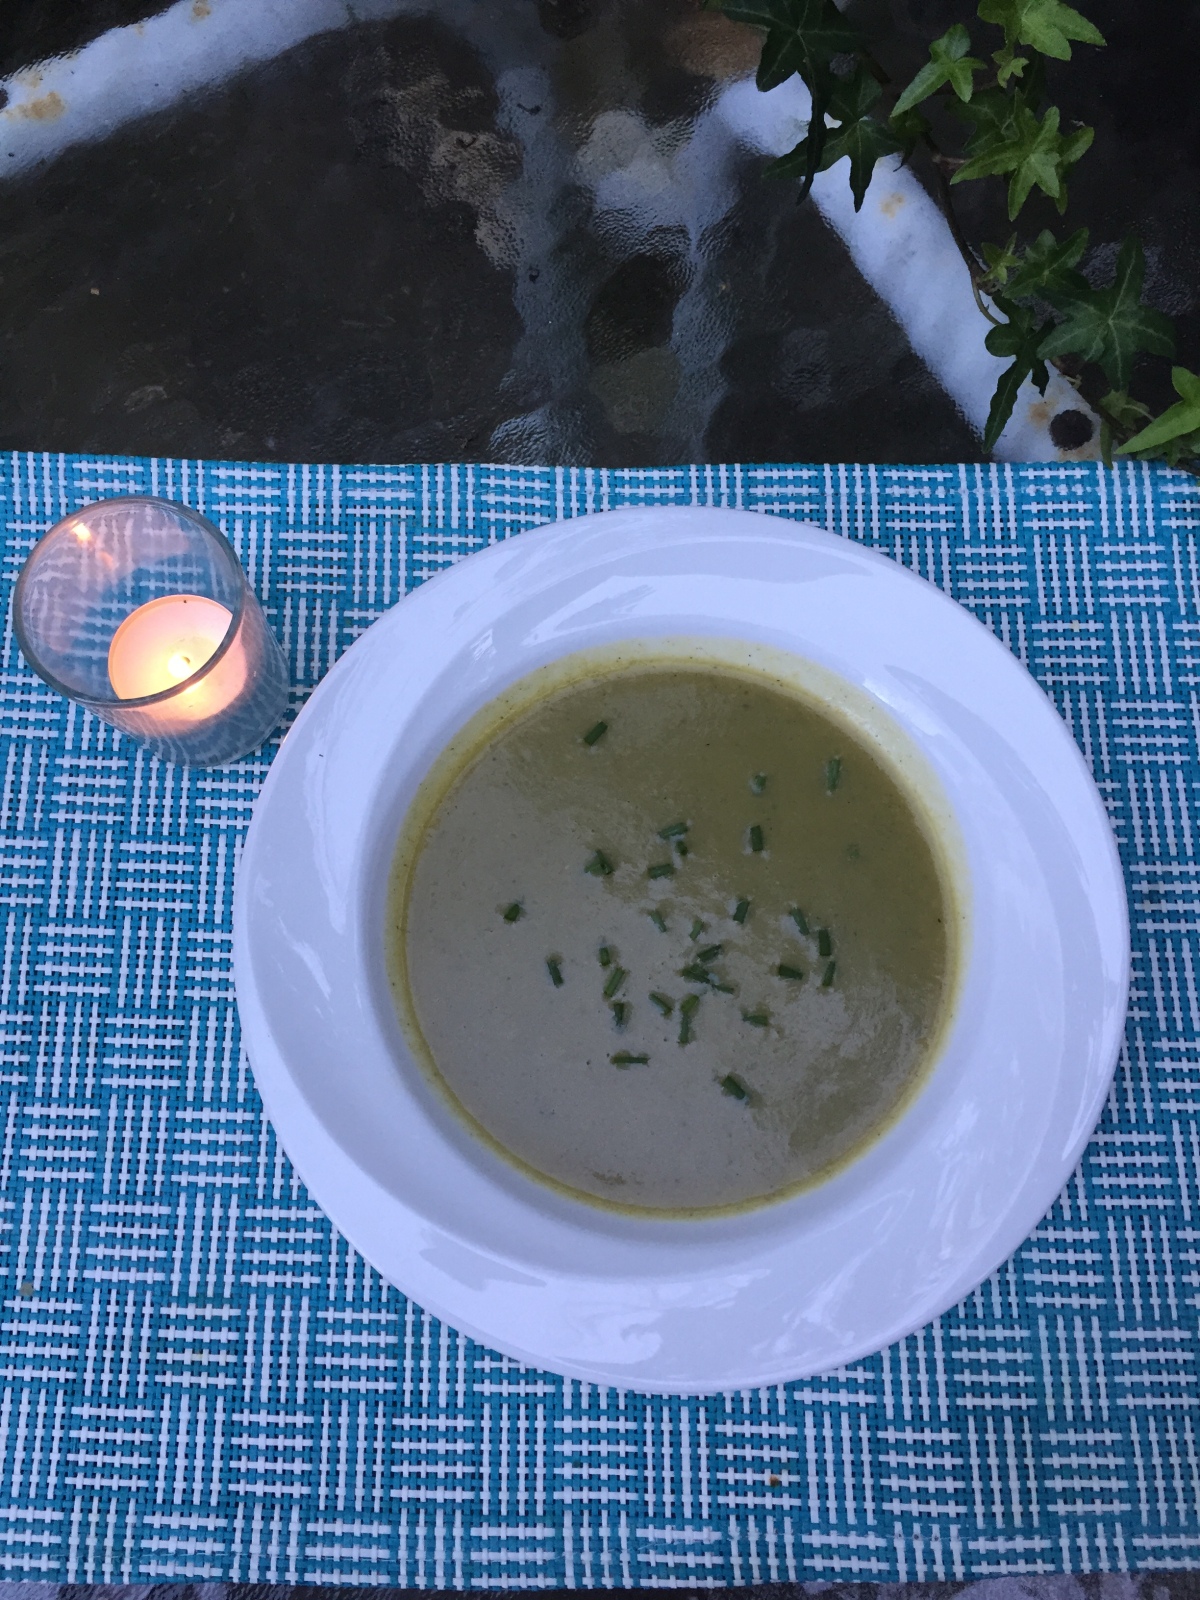 Dining Al Fresco with a Cool Soup